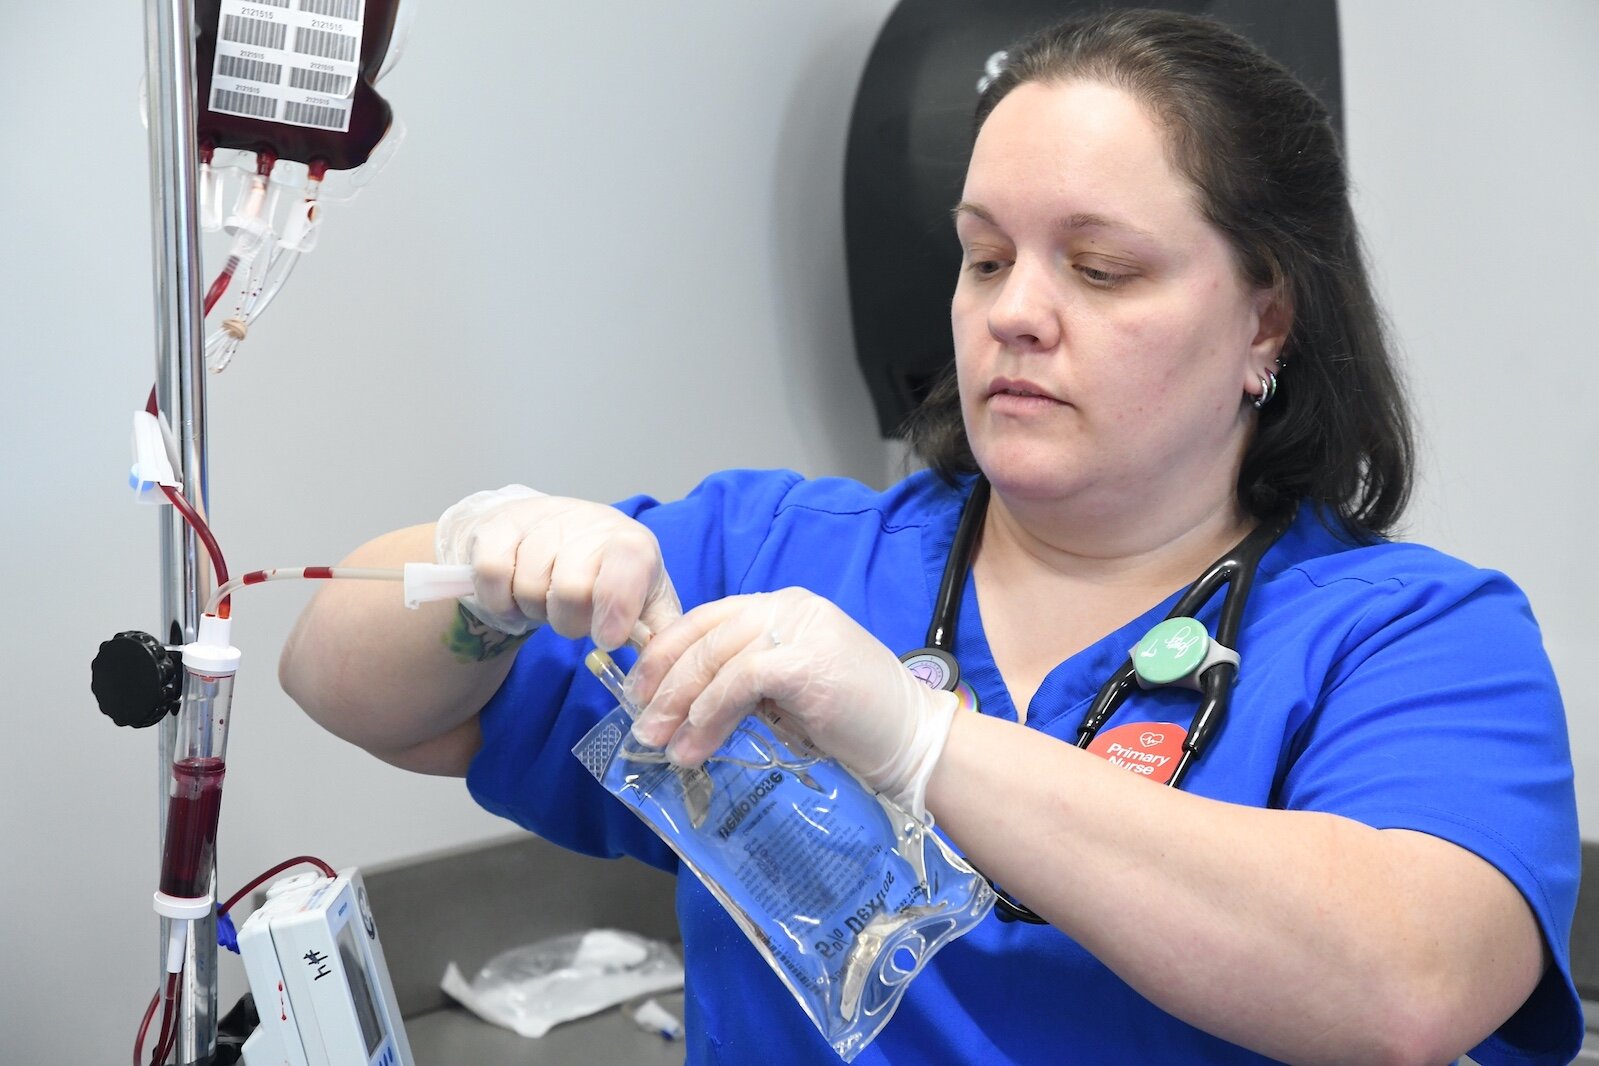 Jenny Tice, a Kellogg Community College nursing student, adjusts an IV bag for “patient” Amado Rojos in the college’s sim lab.